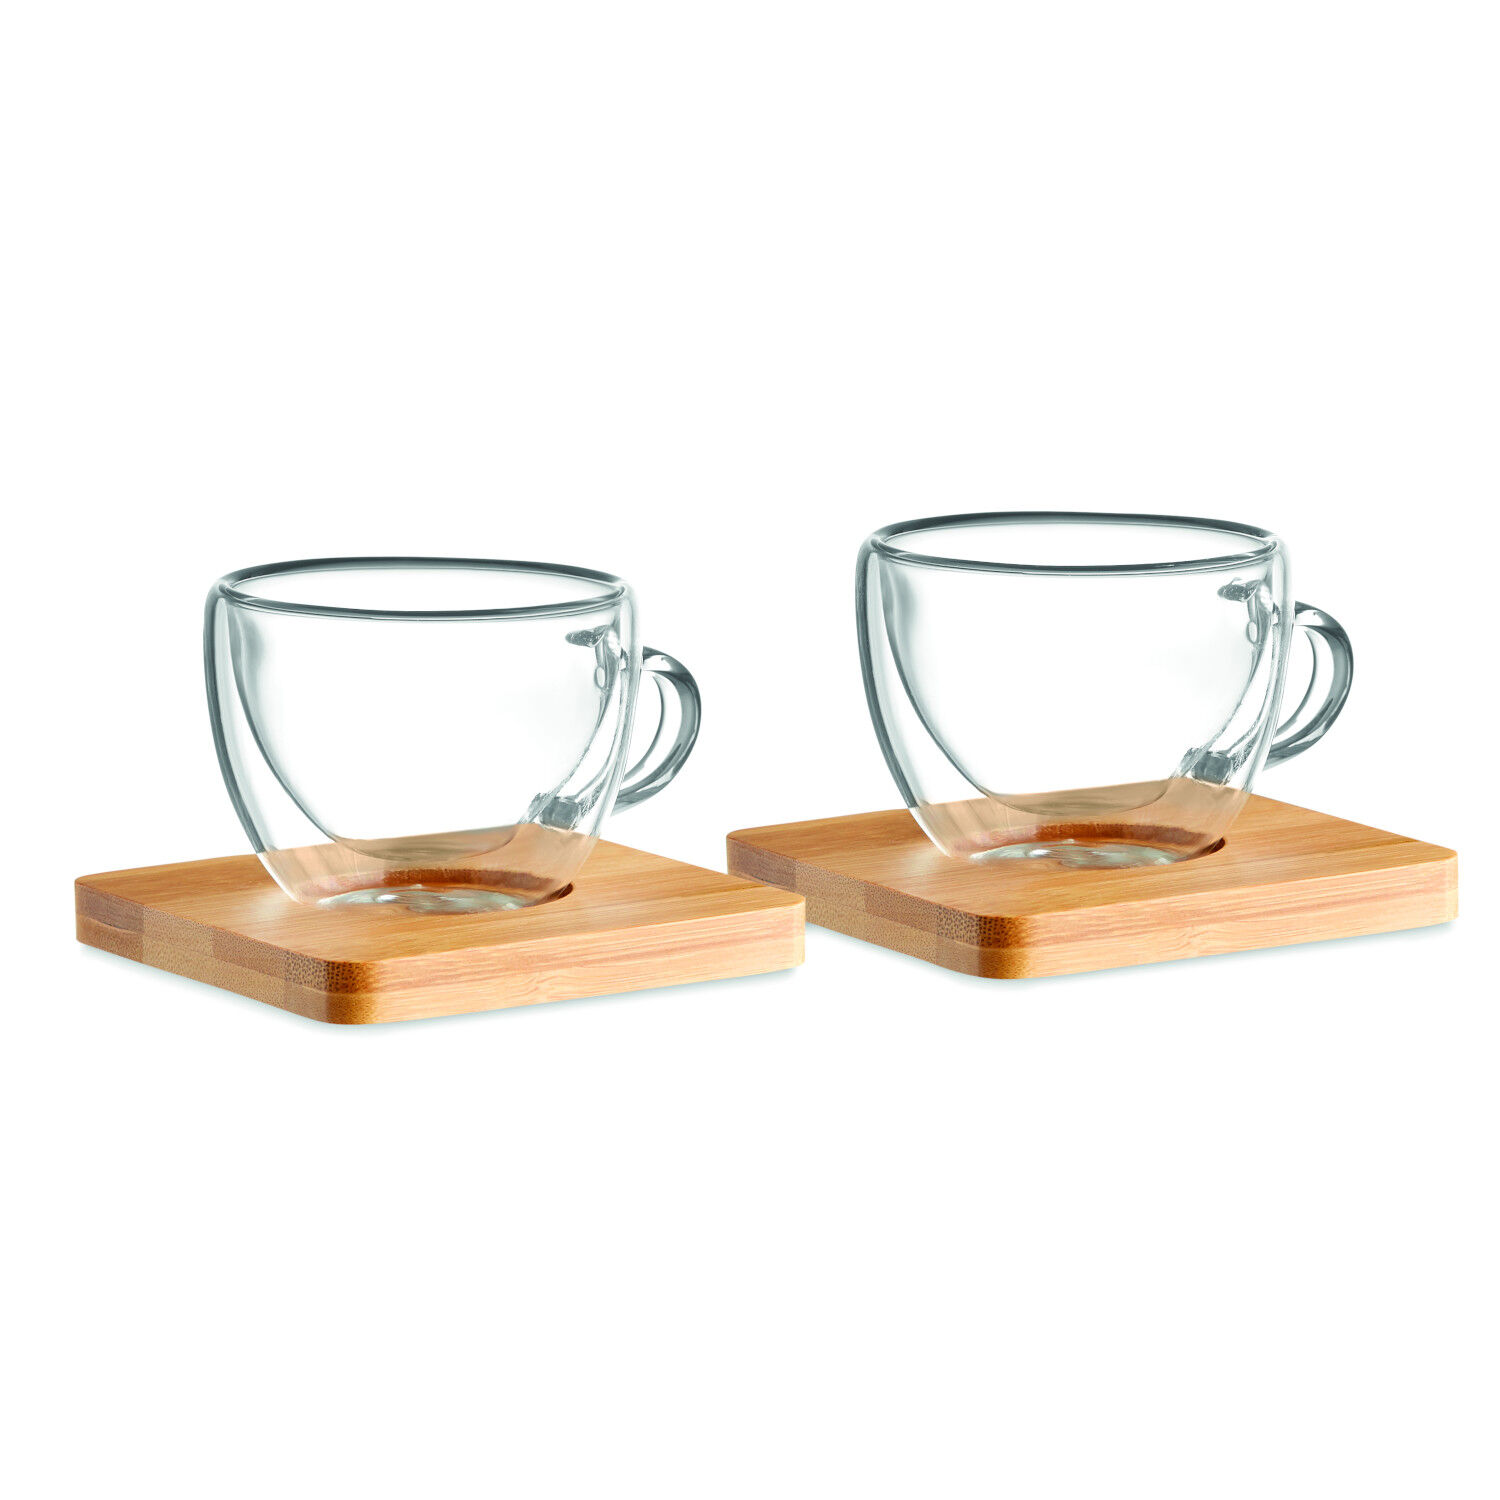 Two Glass Espresso Cups with Bamboo Saucers